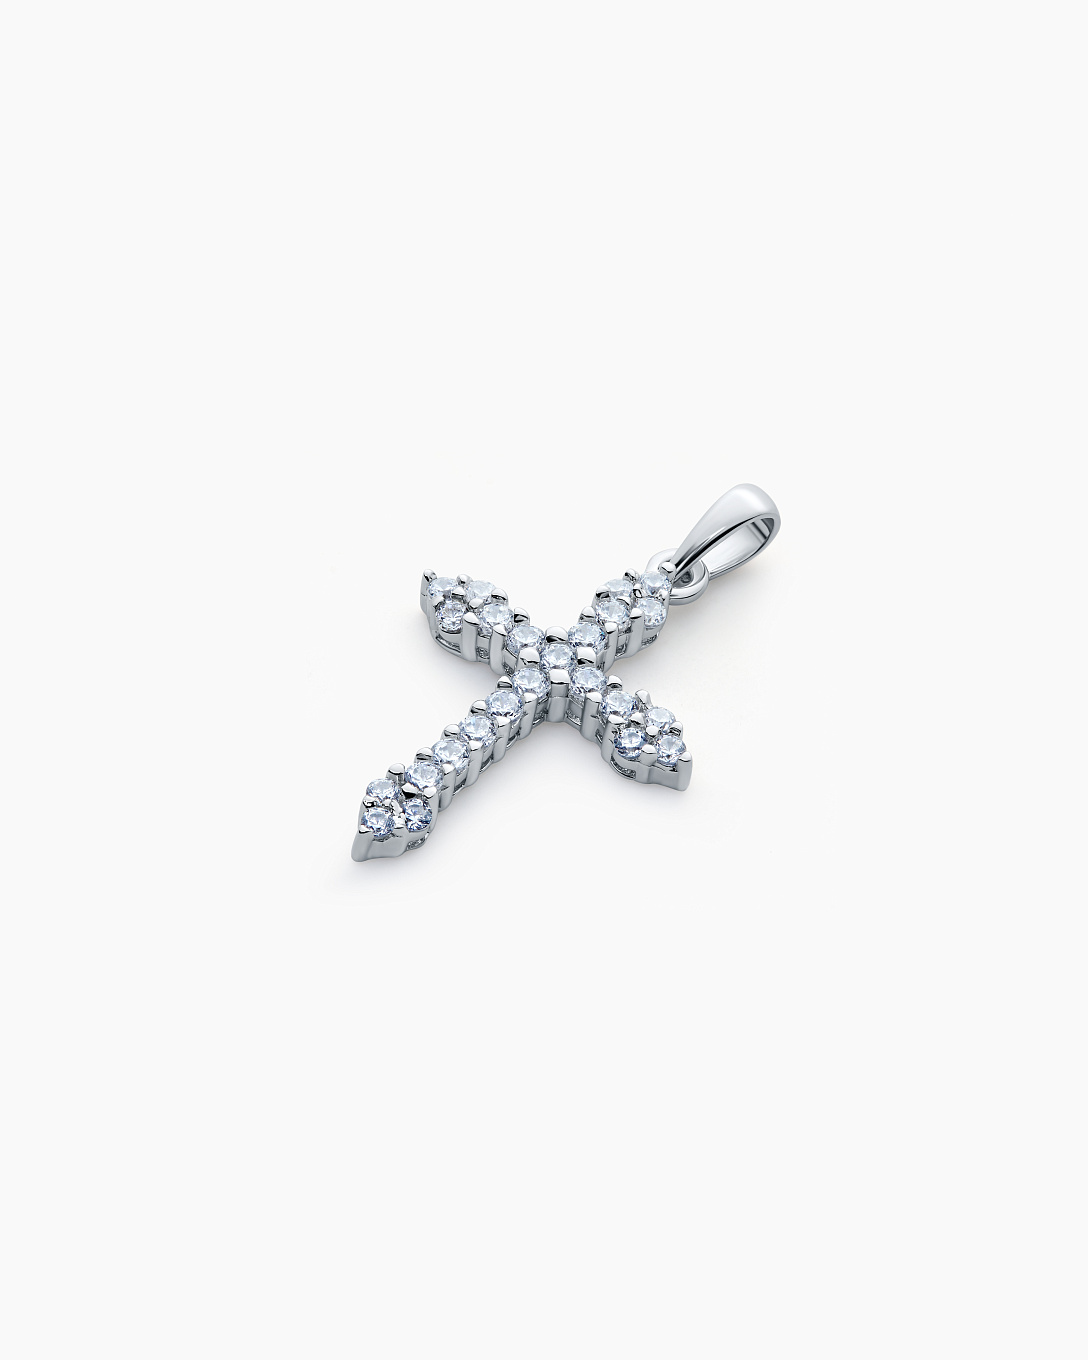 Silver pendant with Cubic Zirconia